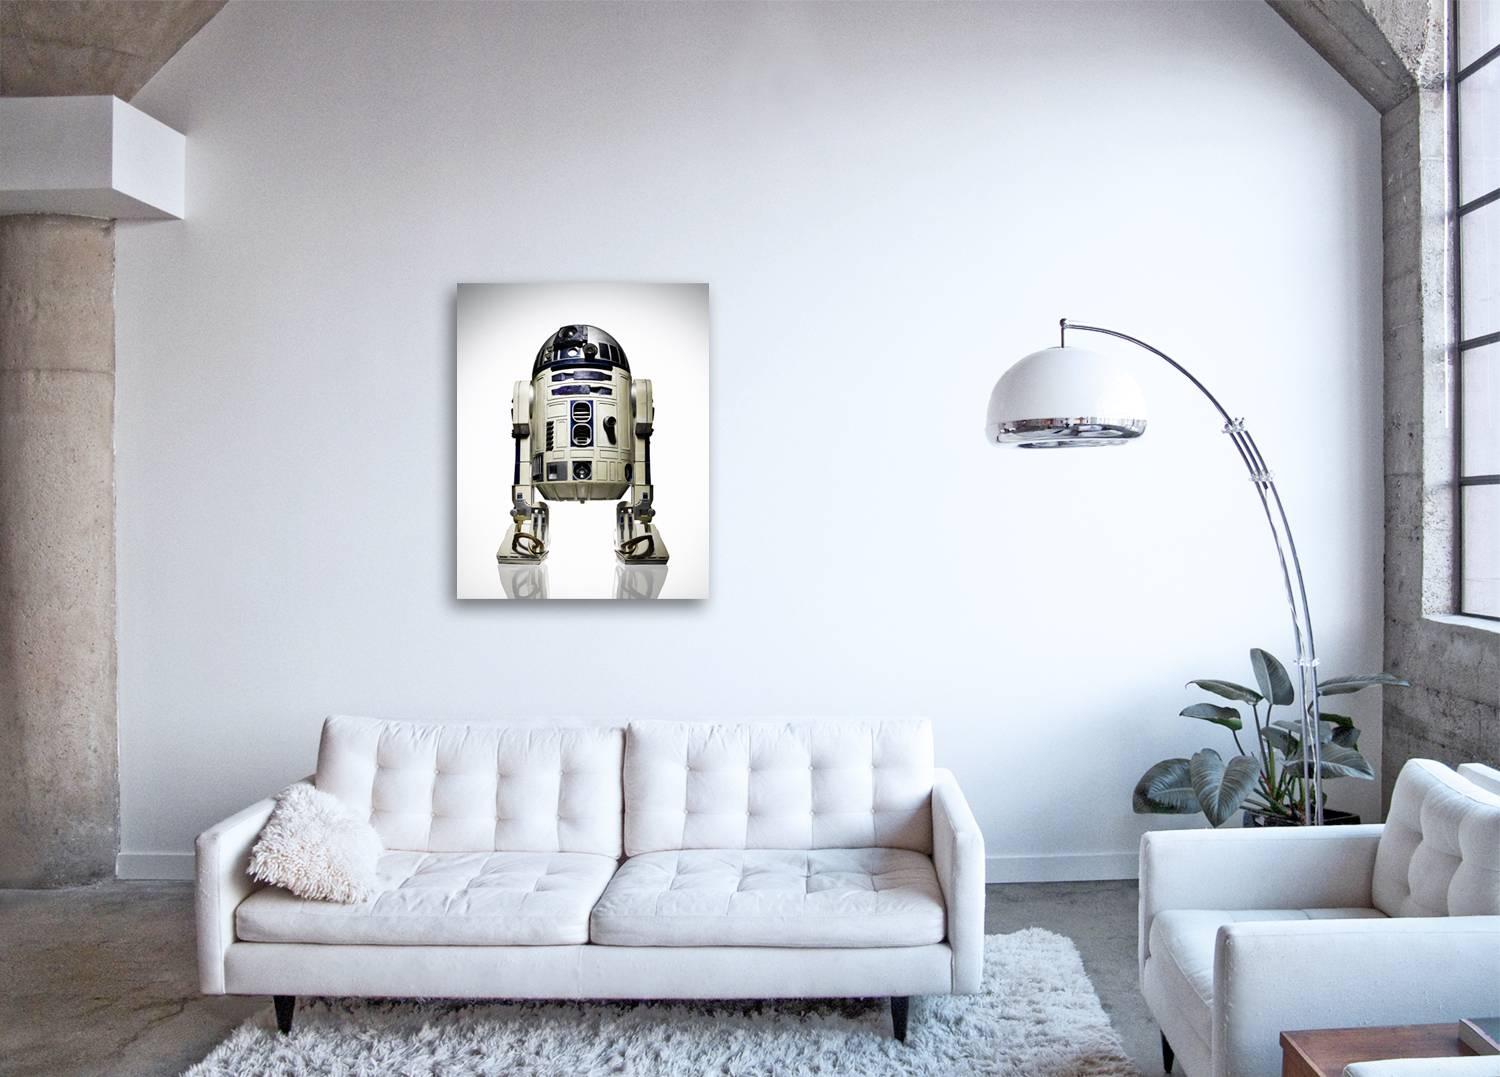 Star Wars R2-D2 -  large format photograph of the iconic droid robot  - Photograph by Tom Schierlitz